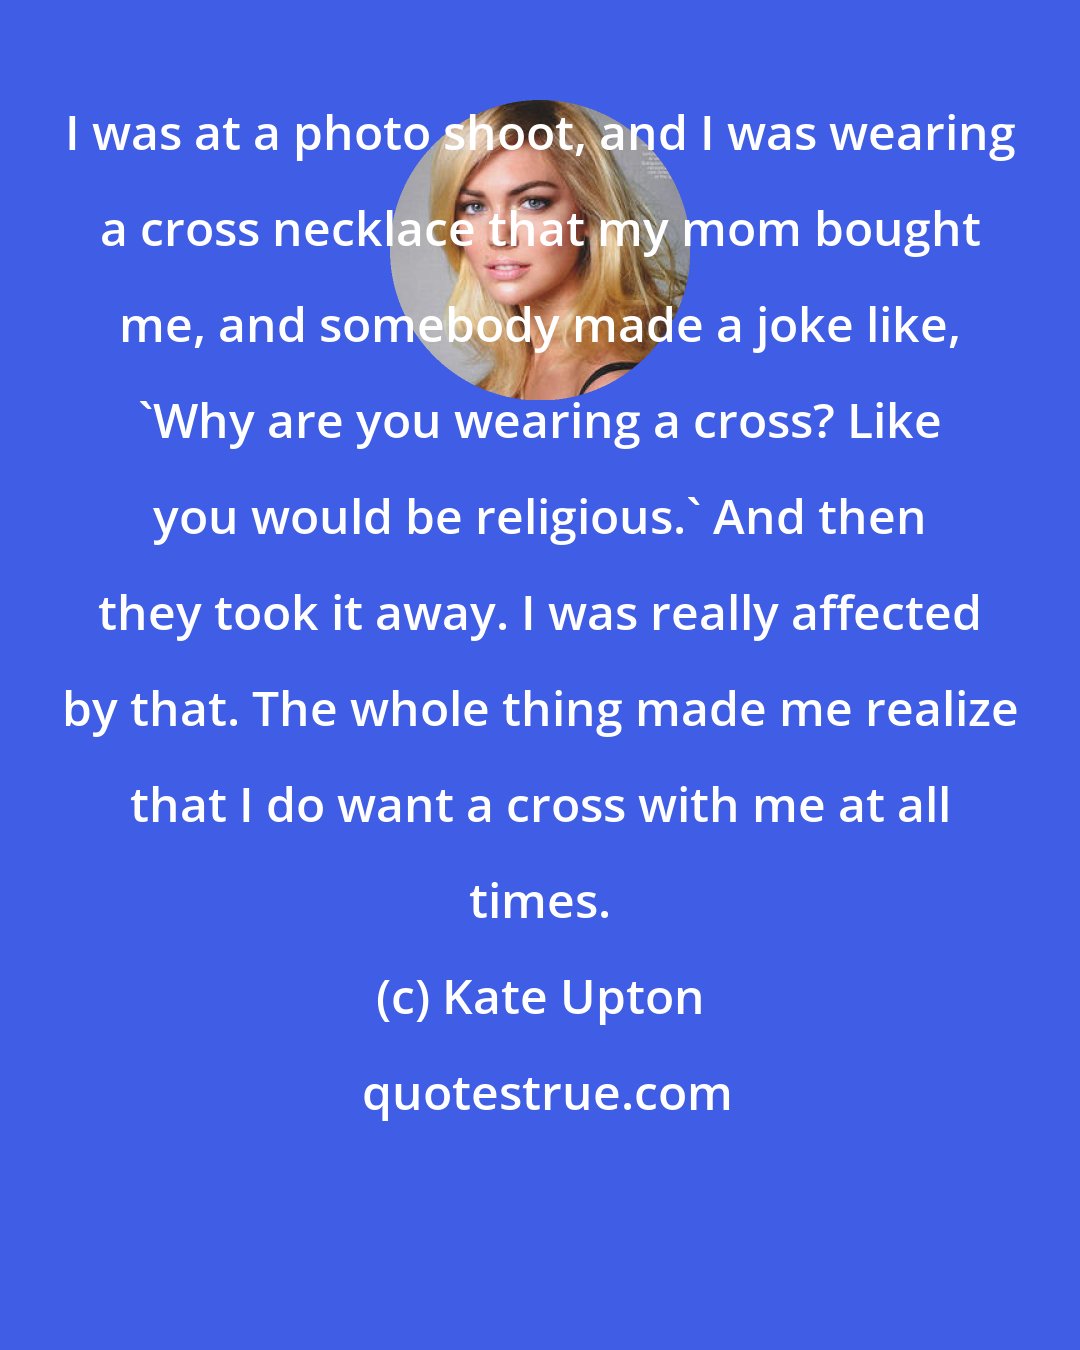 Kate Upton: I was at a photo shoot, and I was wearing a cross necklace that my mom bought me, and somebody made a joke like, 'Why are you wearing a cross? Like you would be religious.' And then they took it away. I was really affected by that. The whole thing made me realize that I do want a cross with me at all times.